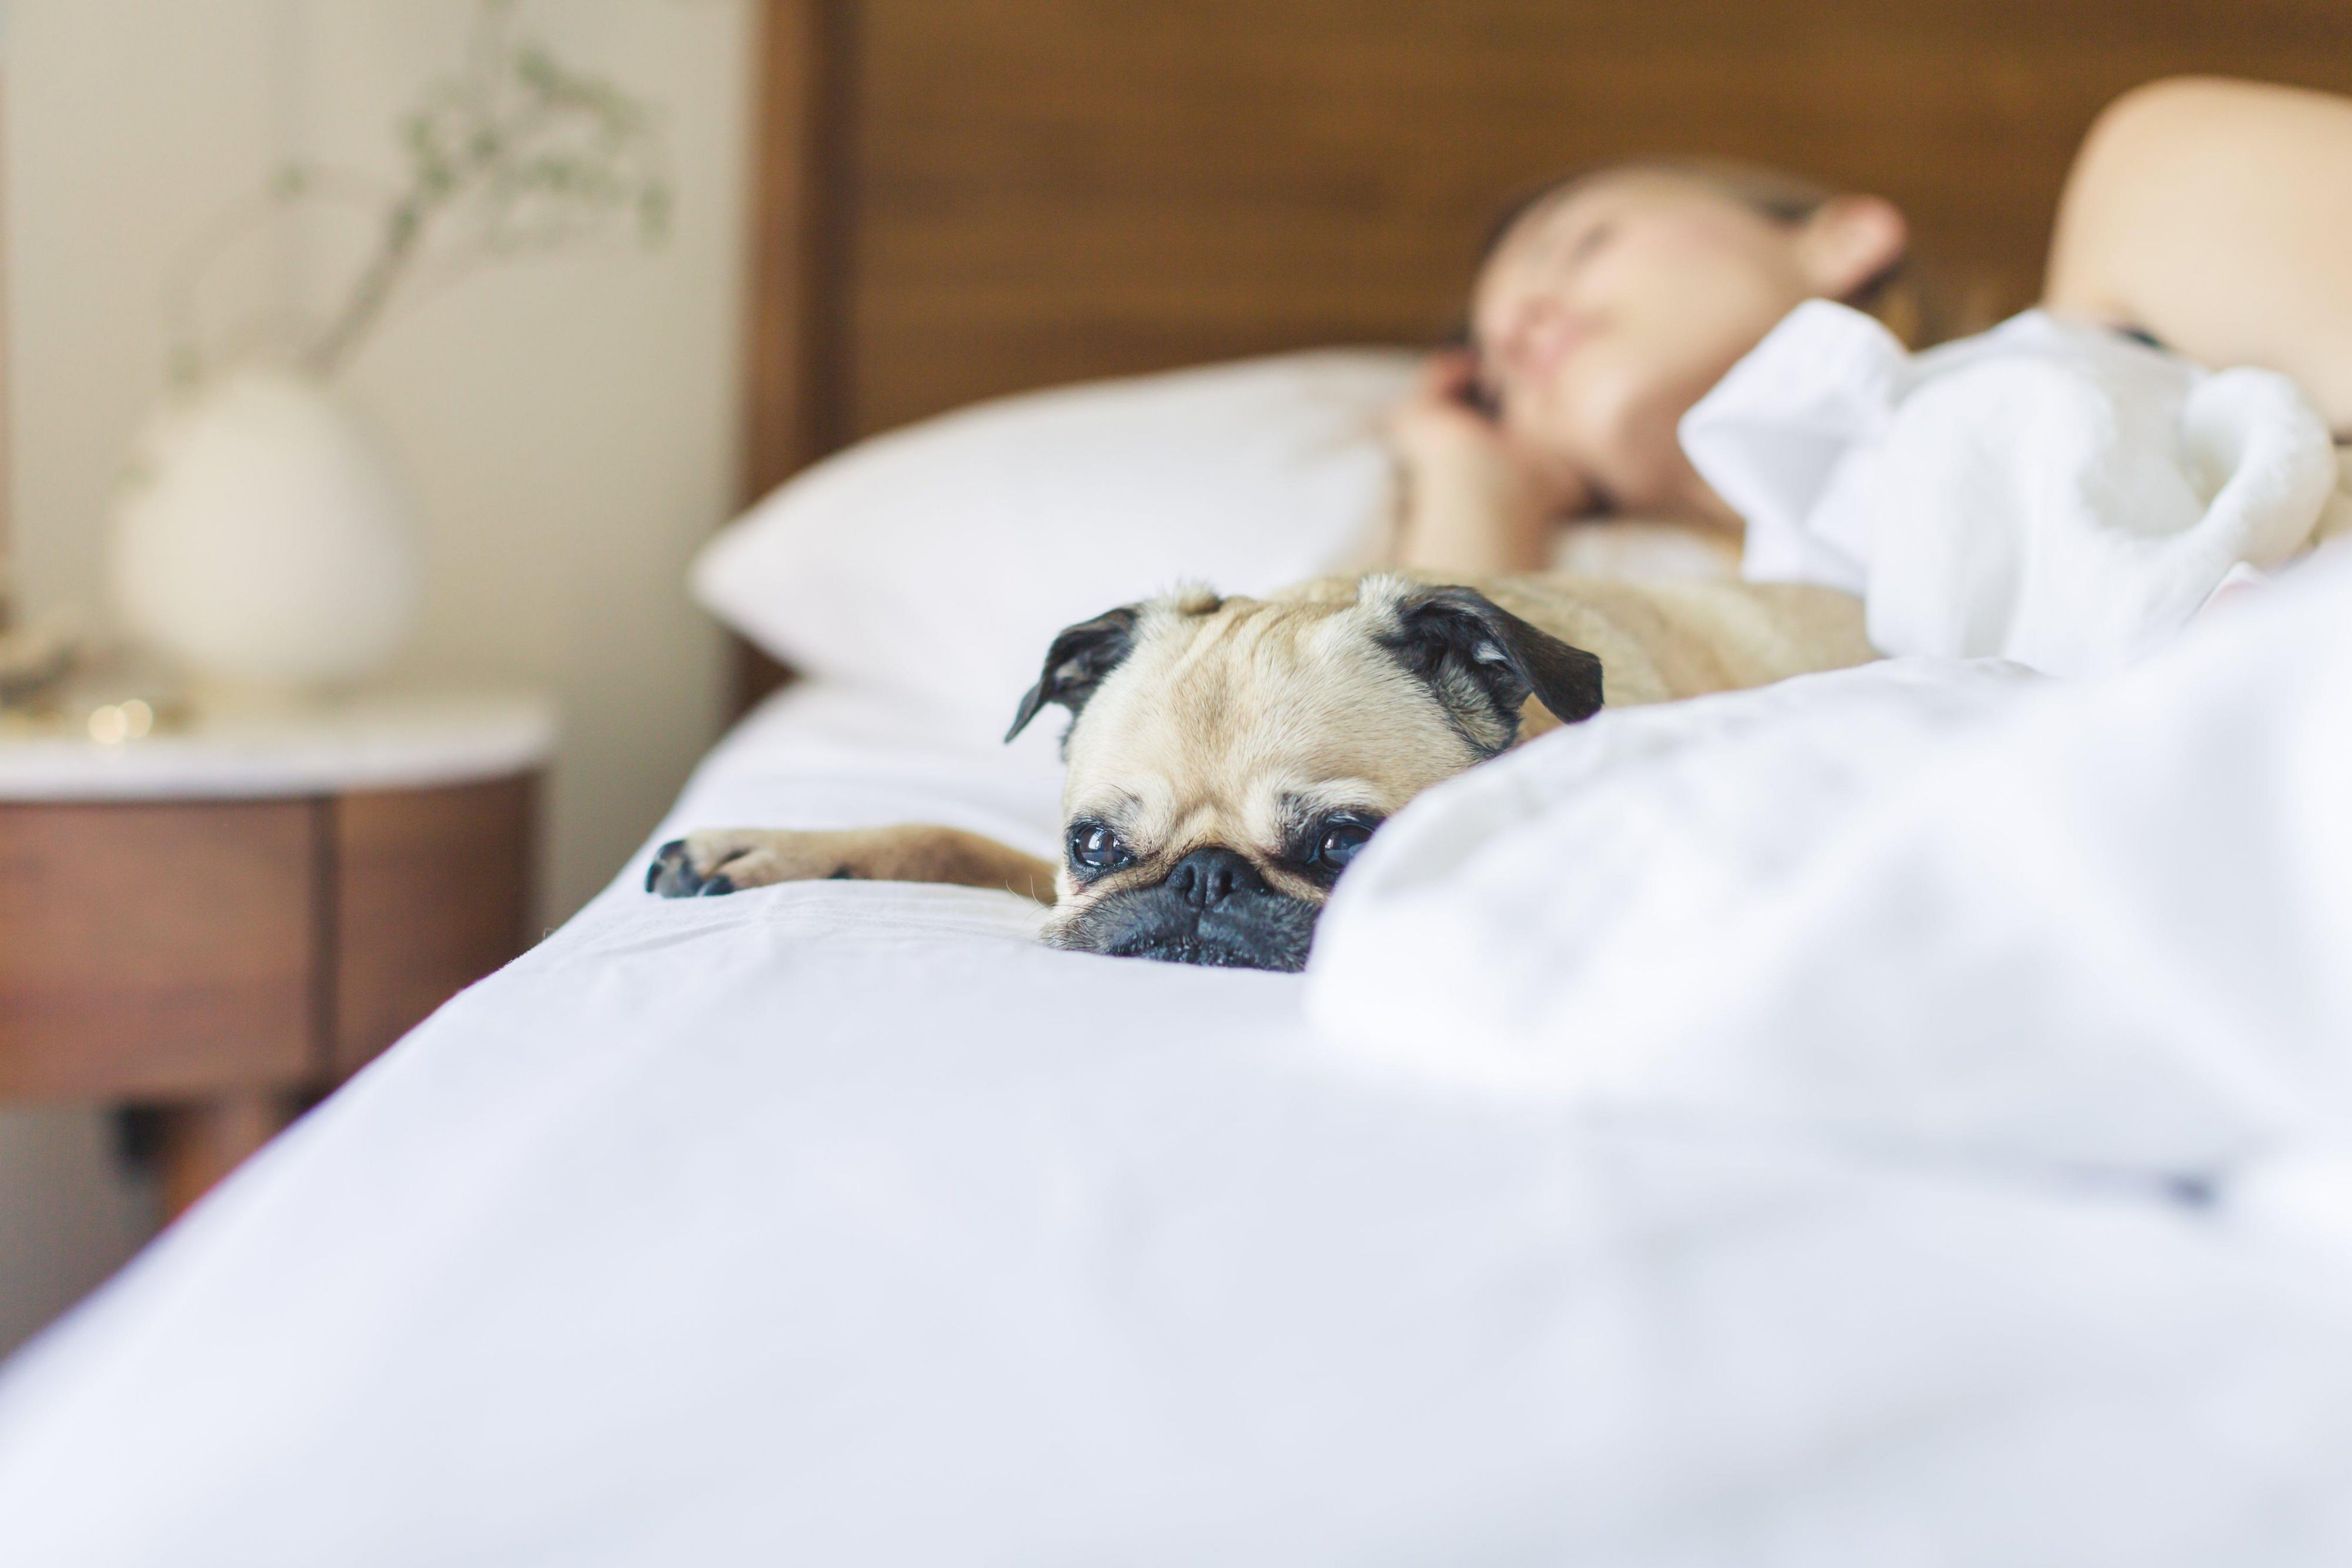 No need to leave your furry friends at home. The Staybridge Suites is pet friendly. Pet fee of $75 for stays under 6 nights and $150 for stays over 7 nights. Pet walking area with doggie doodie bags and trash receptacle. 